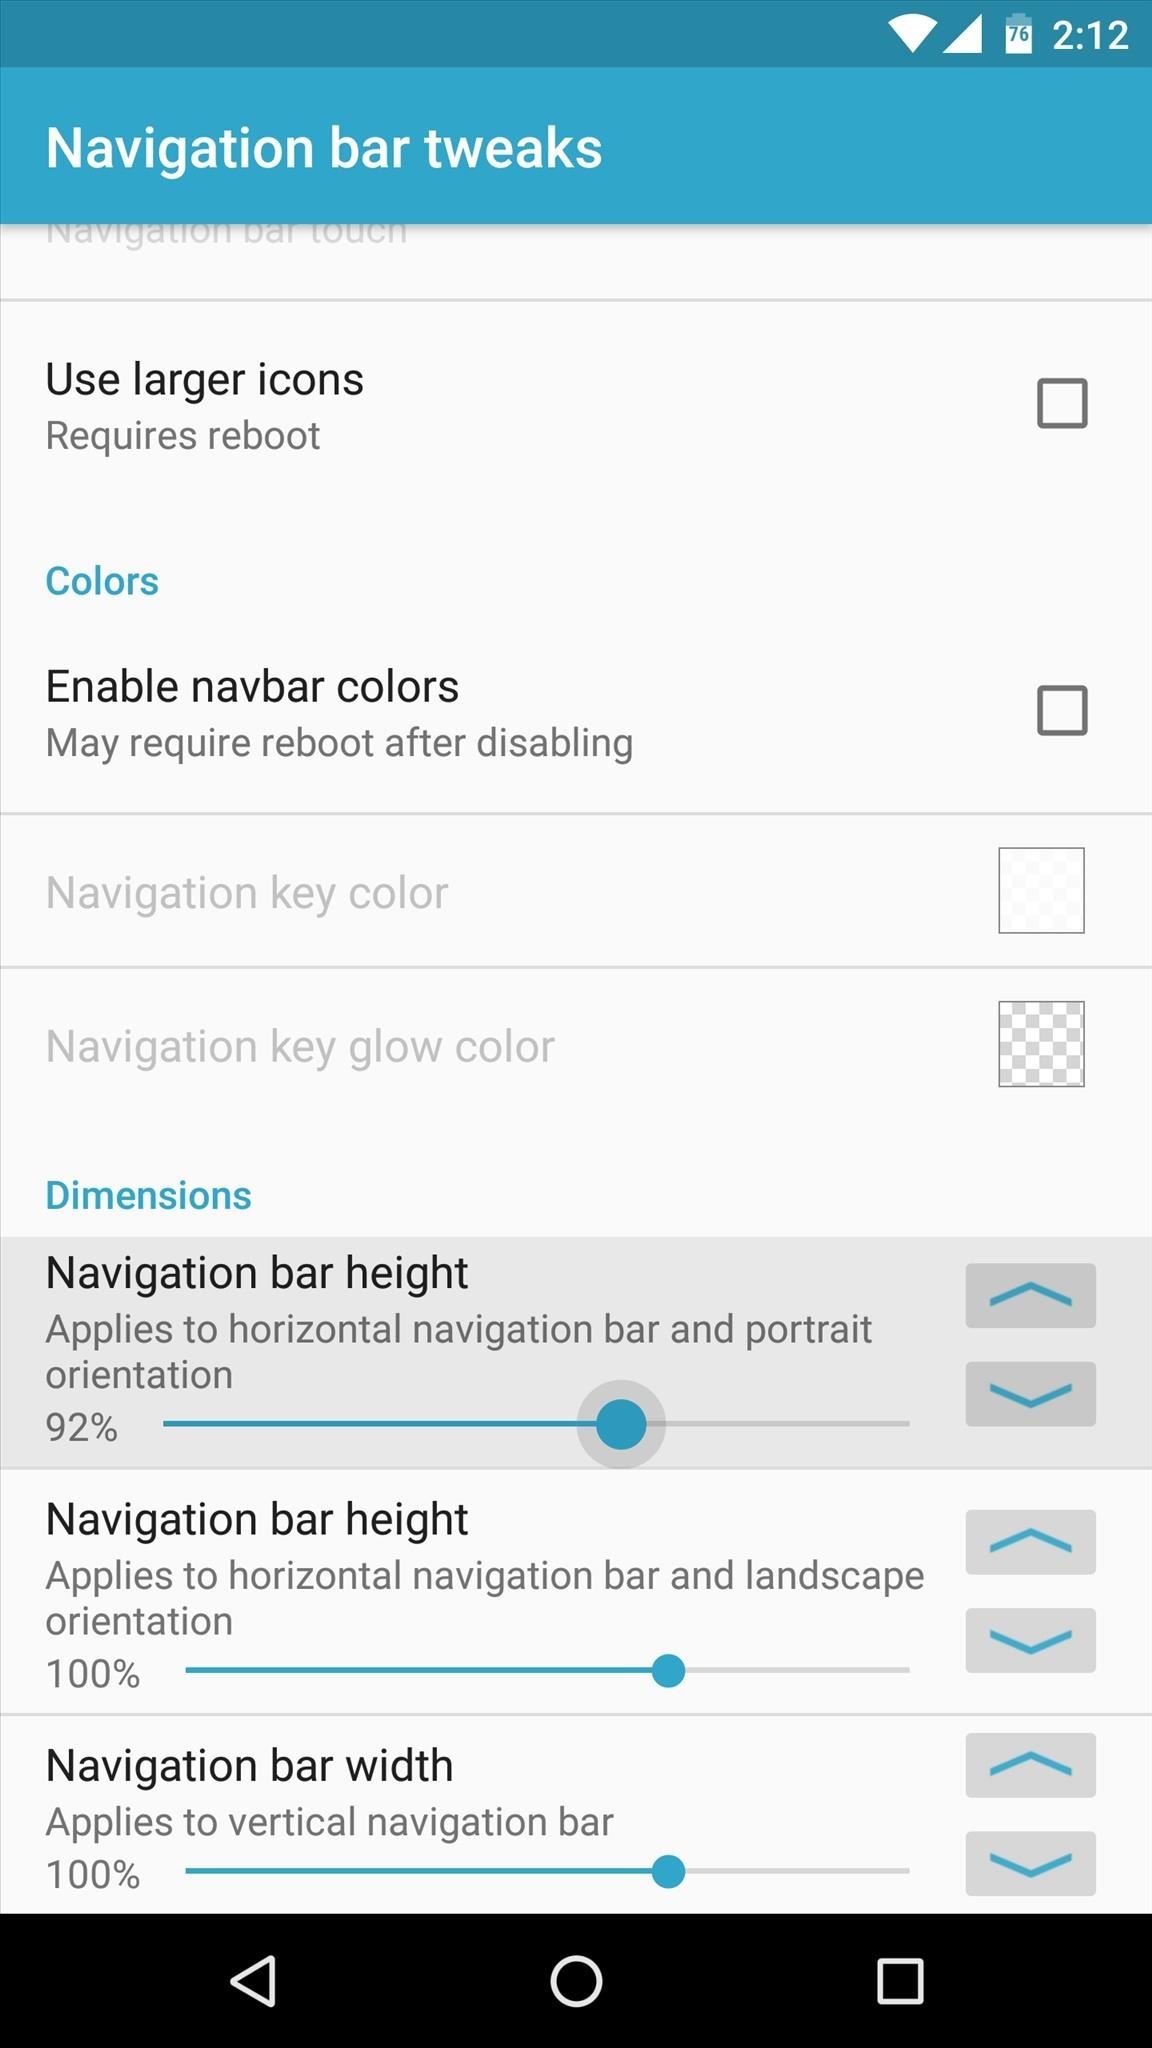 How to Use the Best Root-Level Customization Tool for Android